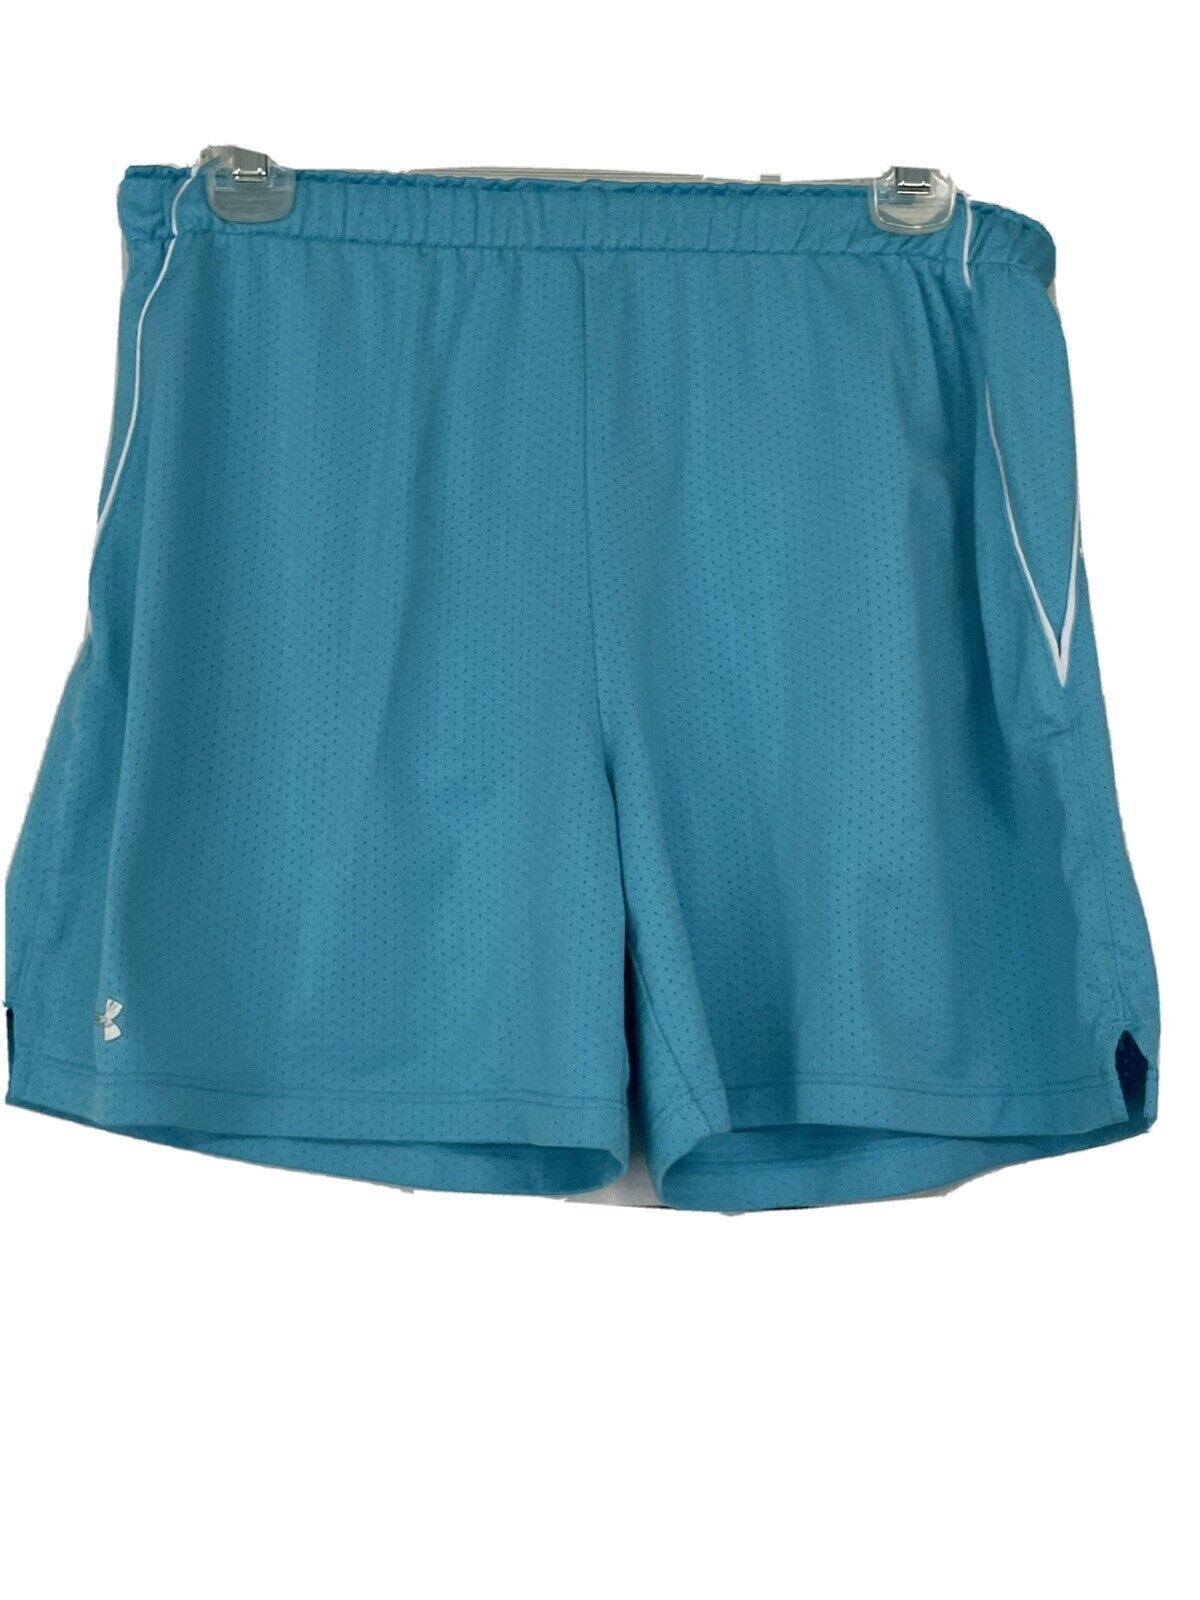 UNDER ARMOUR MENS MEAH Max 89% OFF SIZE BLUE Jacksonville Mall SMALL SHORTS